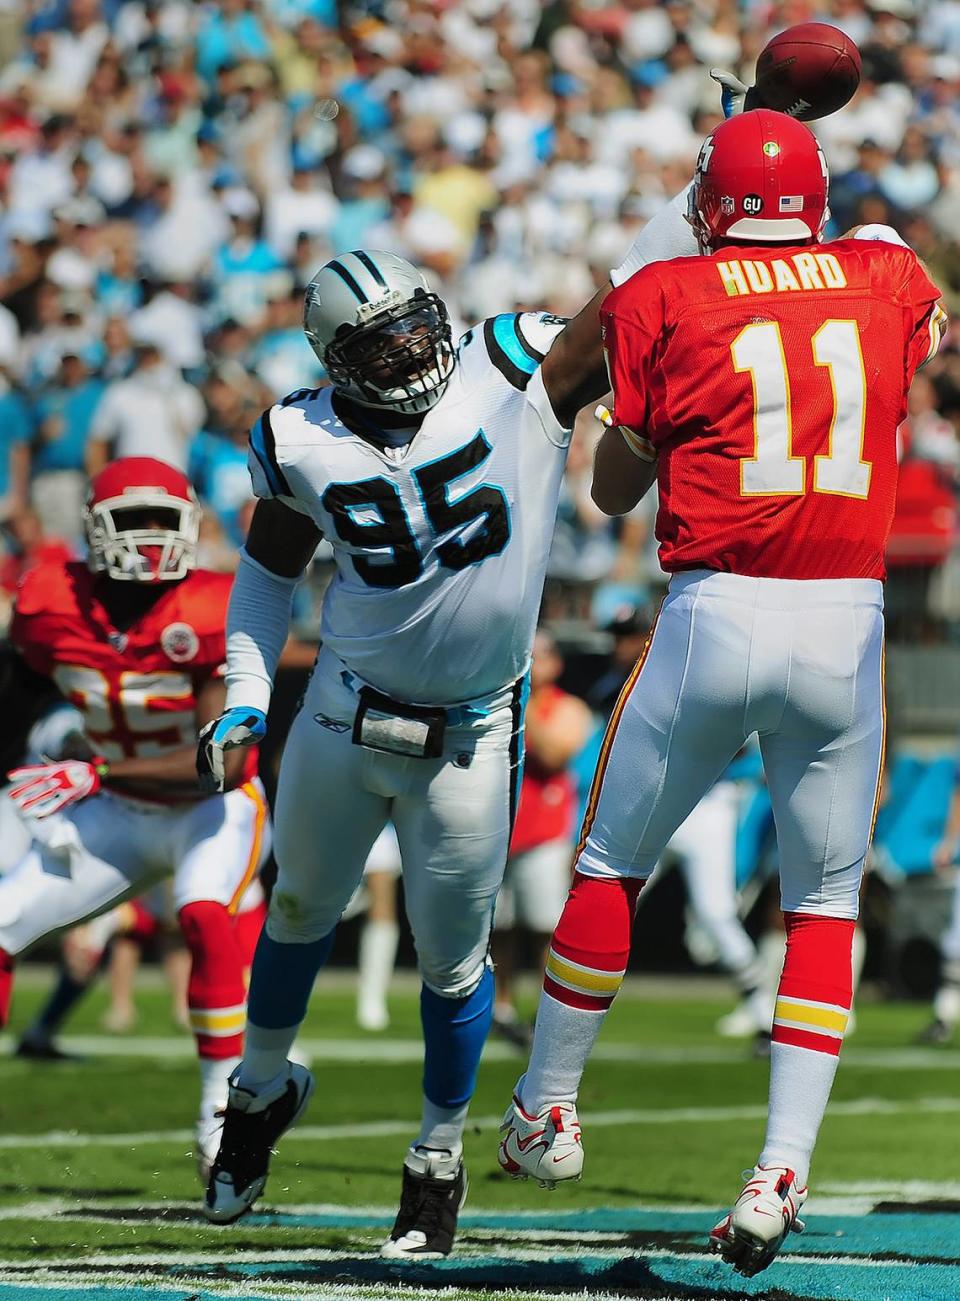 Carolina Panthers (95) defensive end Charles Johnson knocks down a pass by Kansas City Chiefs quarterback Damon Huard (11) during a 2008 win for the Panthers. Johnson ended his career second all-time on the team’s sack list, behind only Julius Peppers.